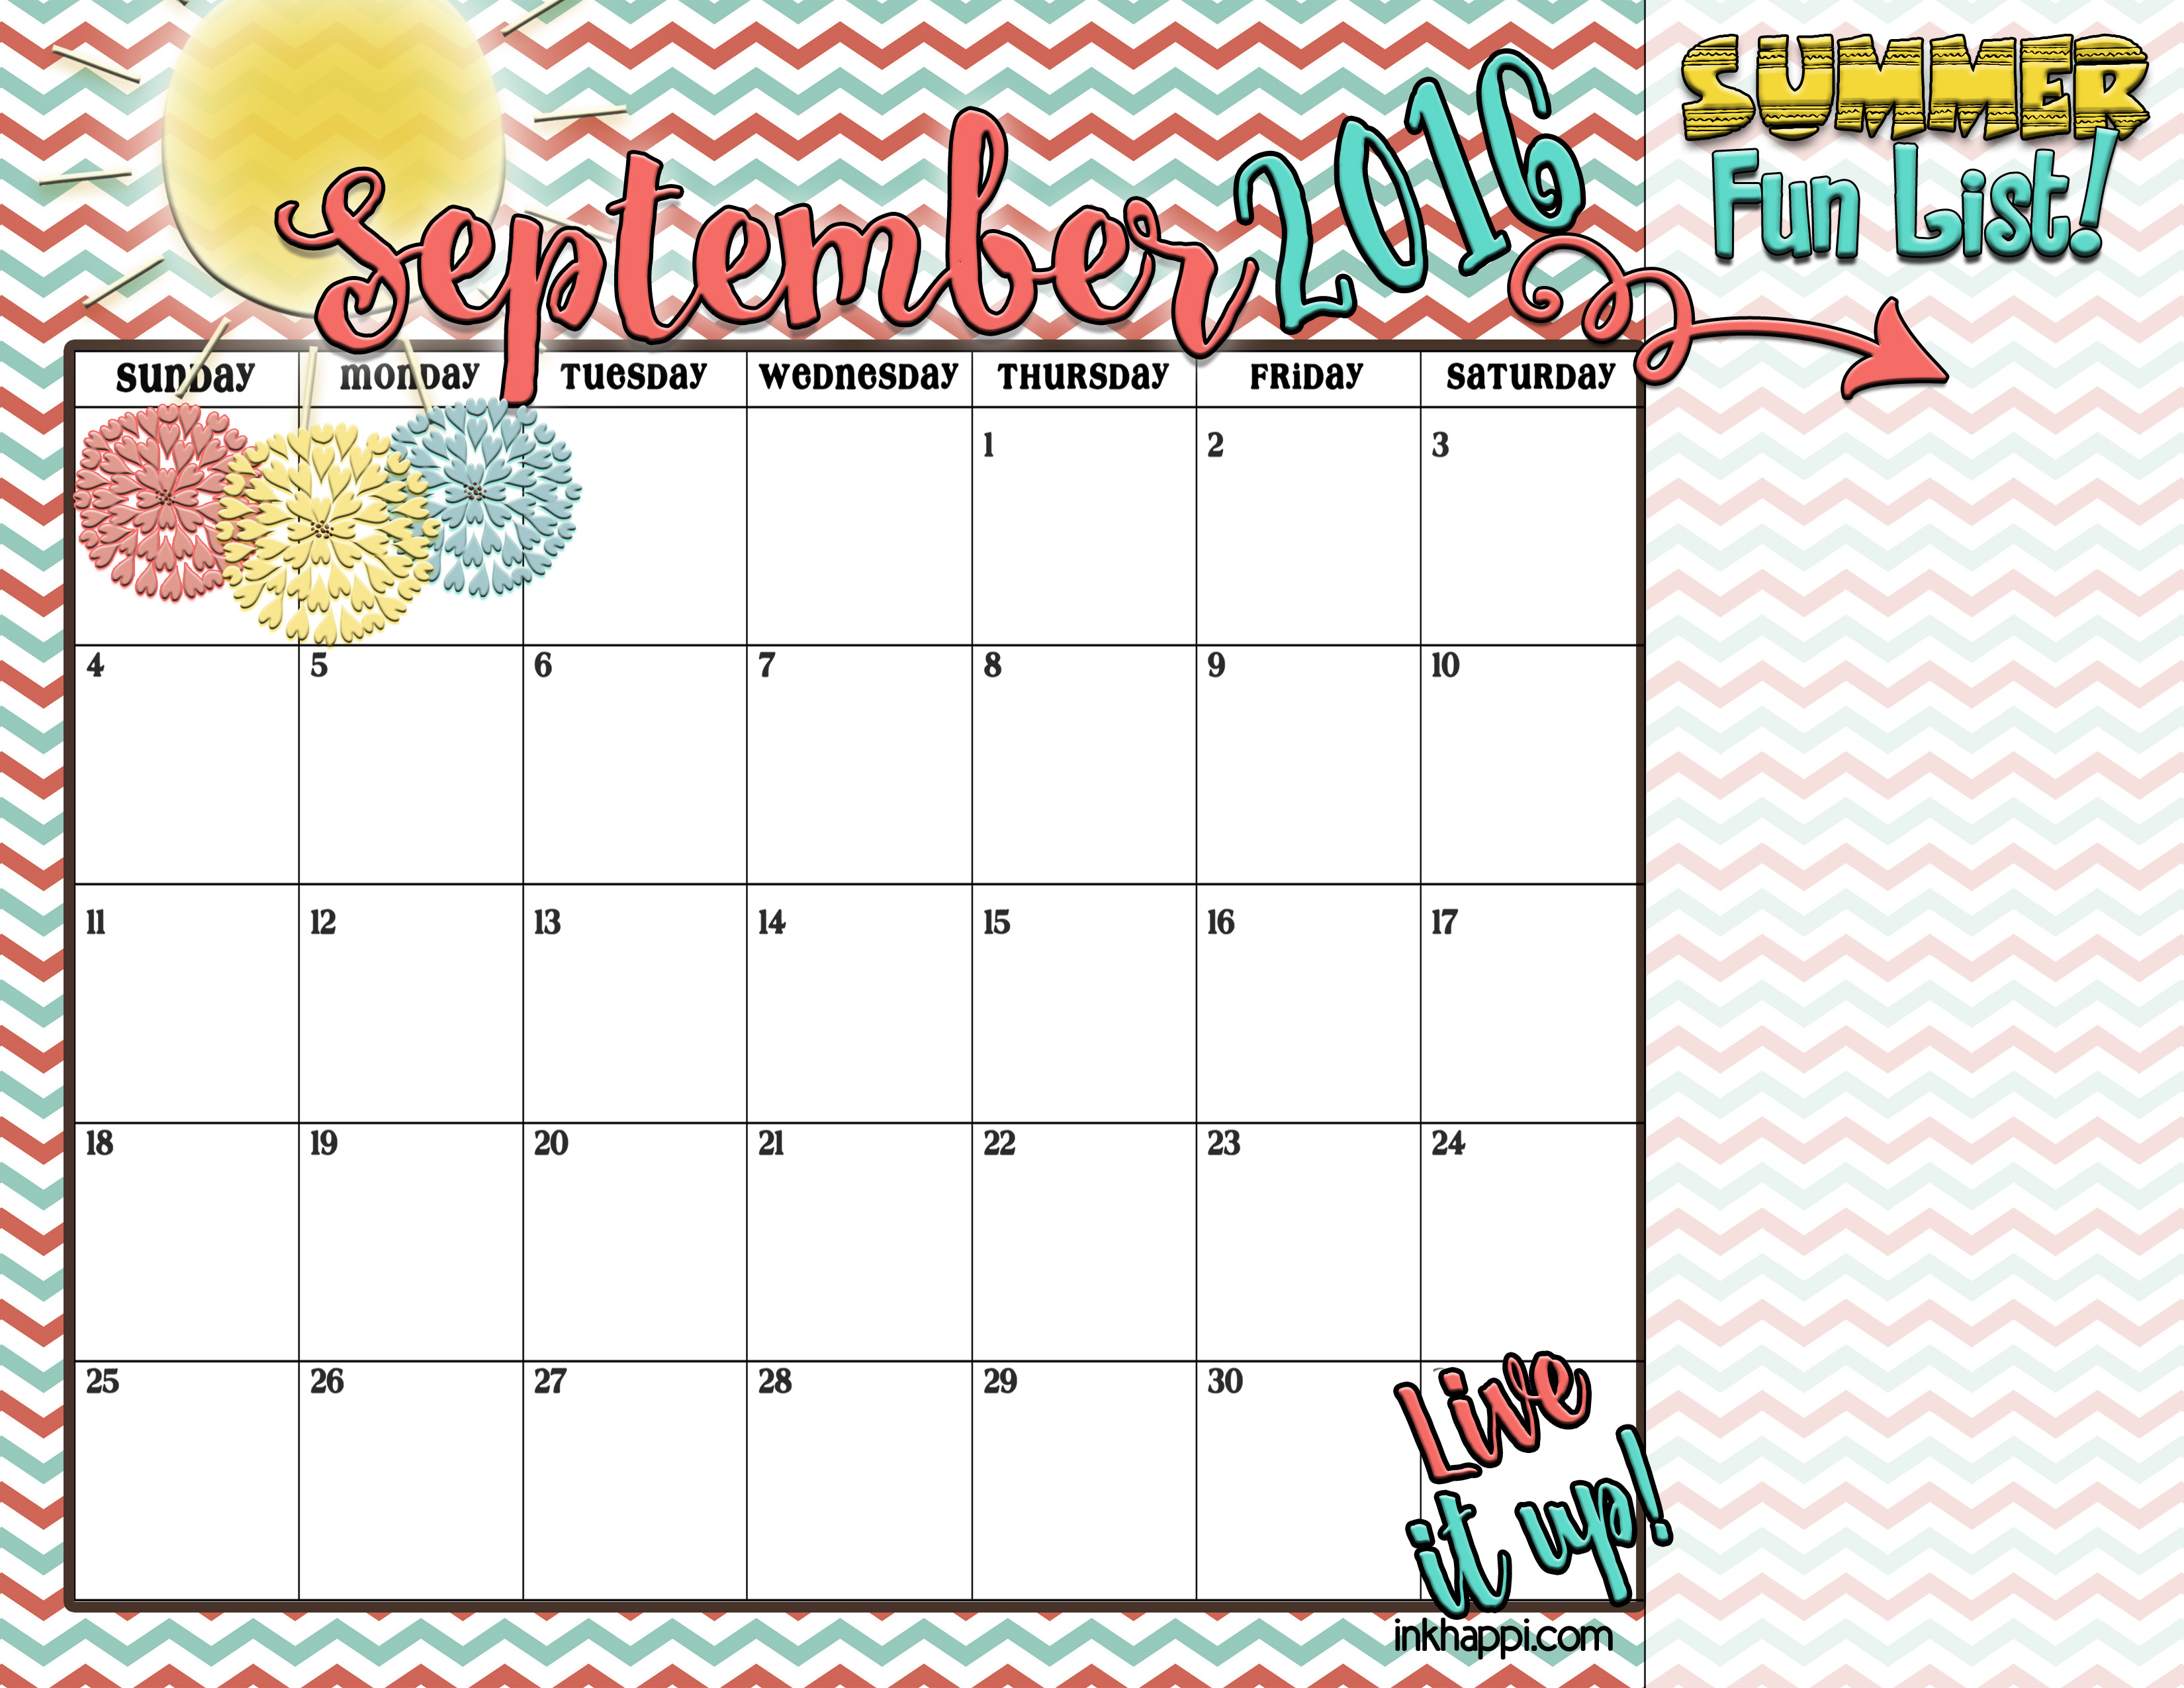 Summer Planning Calendars and ideas! inkhappi